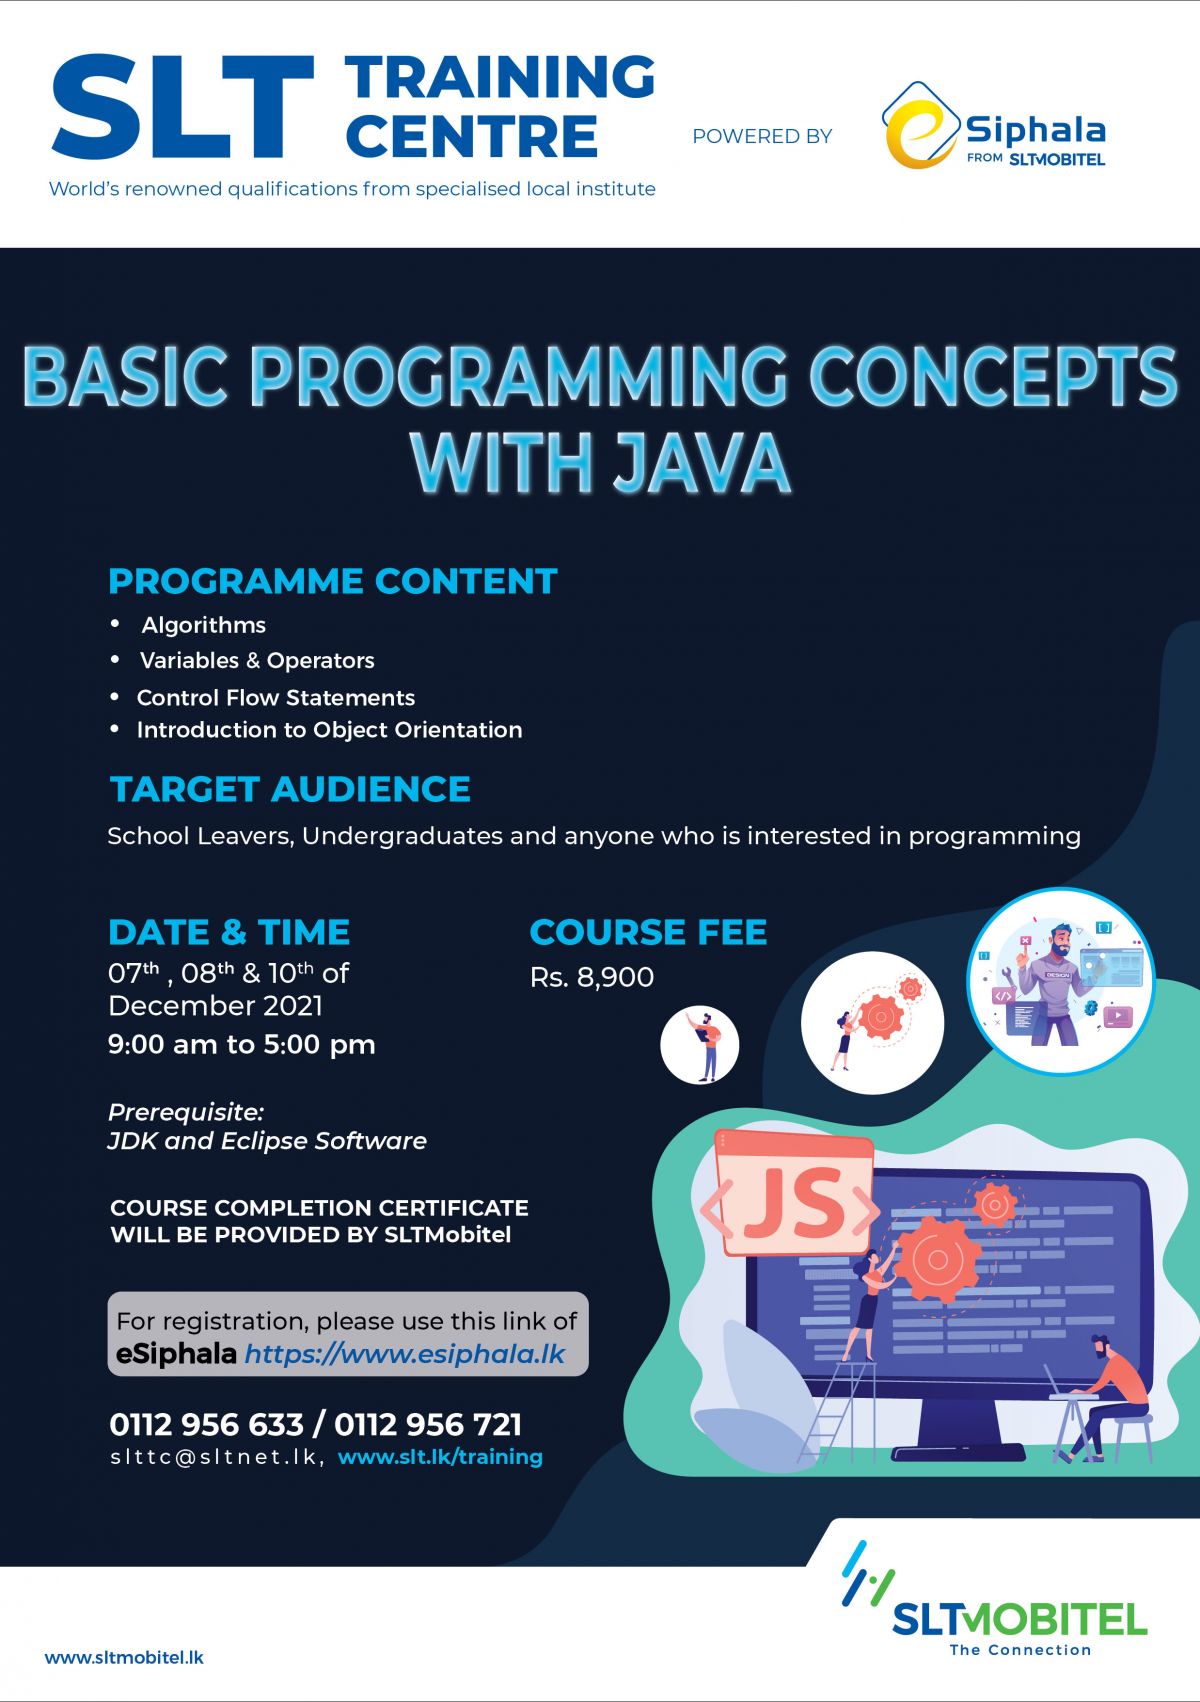 Basic Progrmaming Concepts with JAVA-December 2021